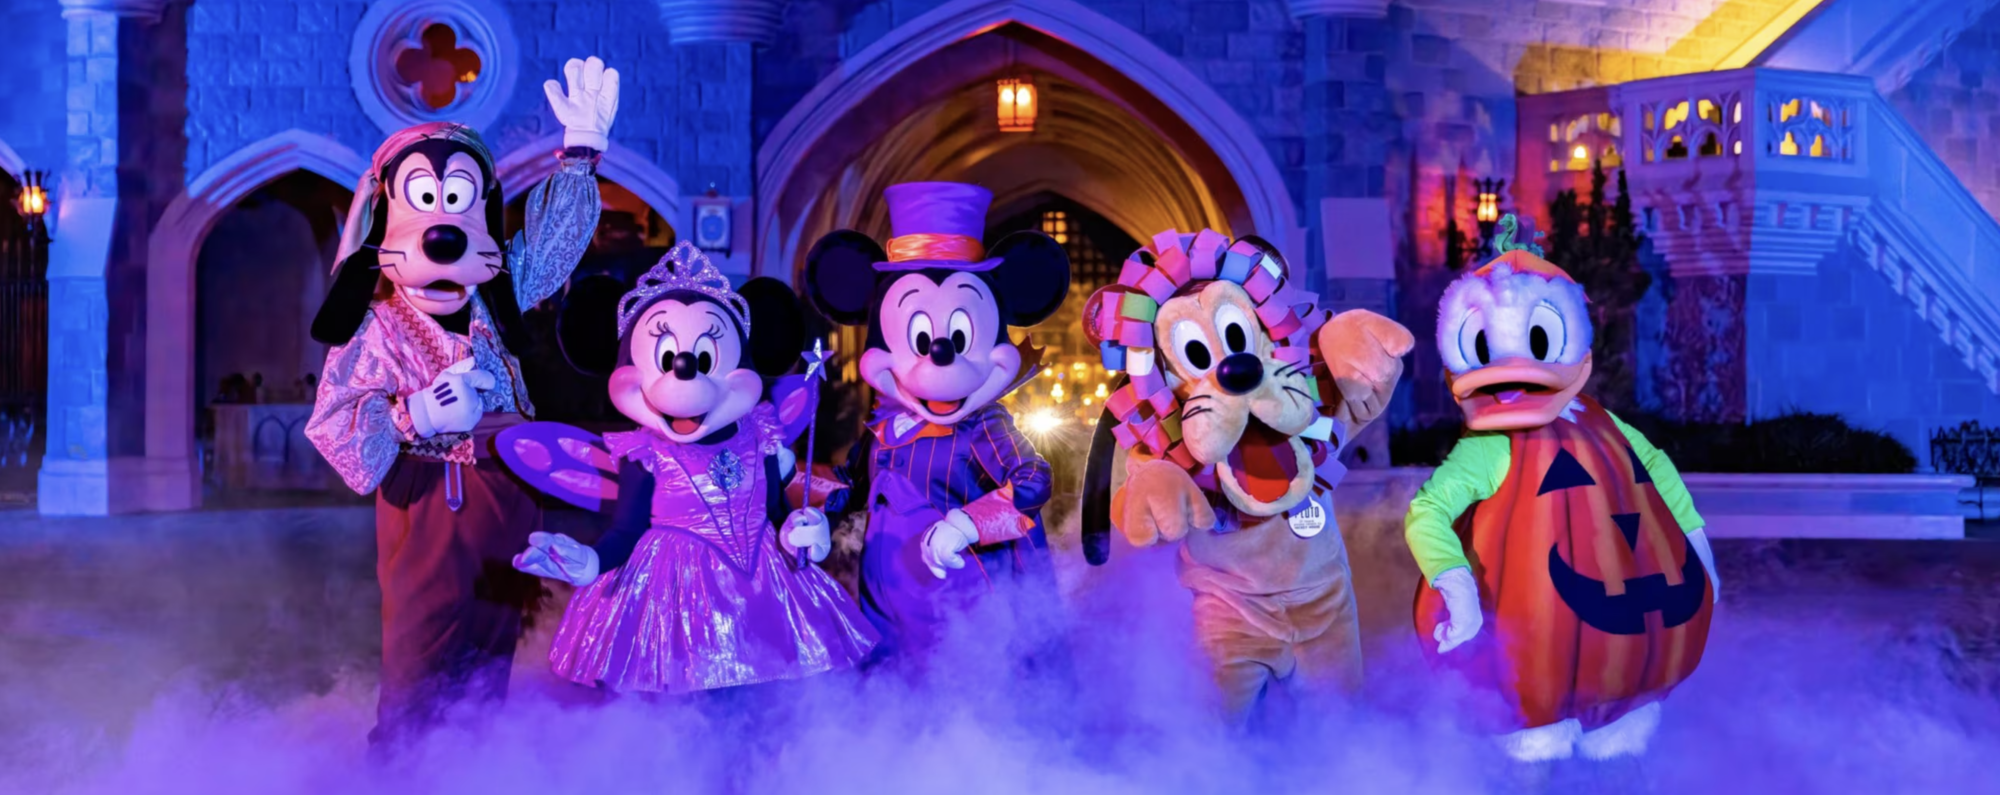 mickey and friends in halloween costumes